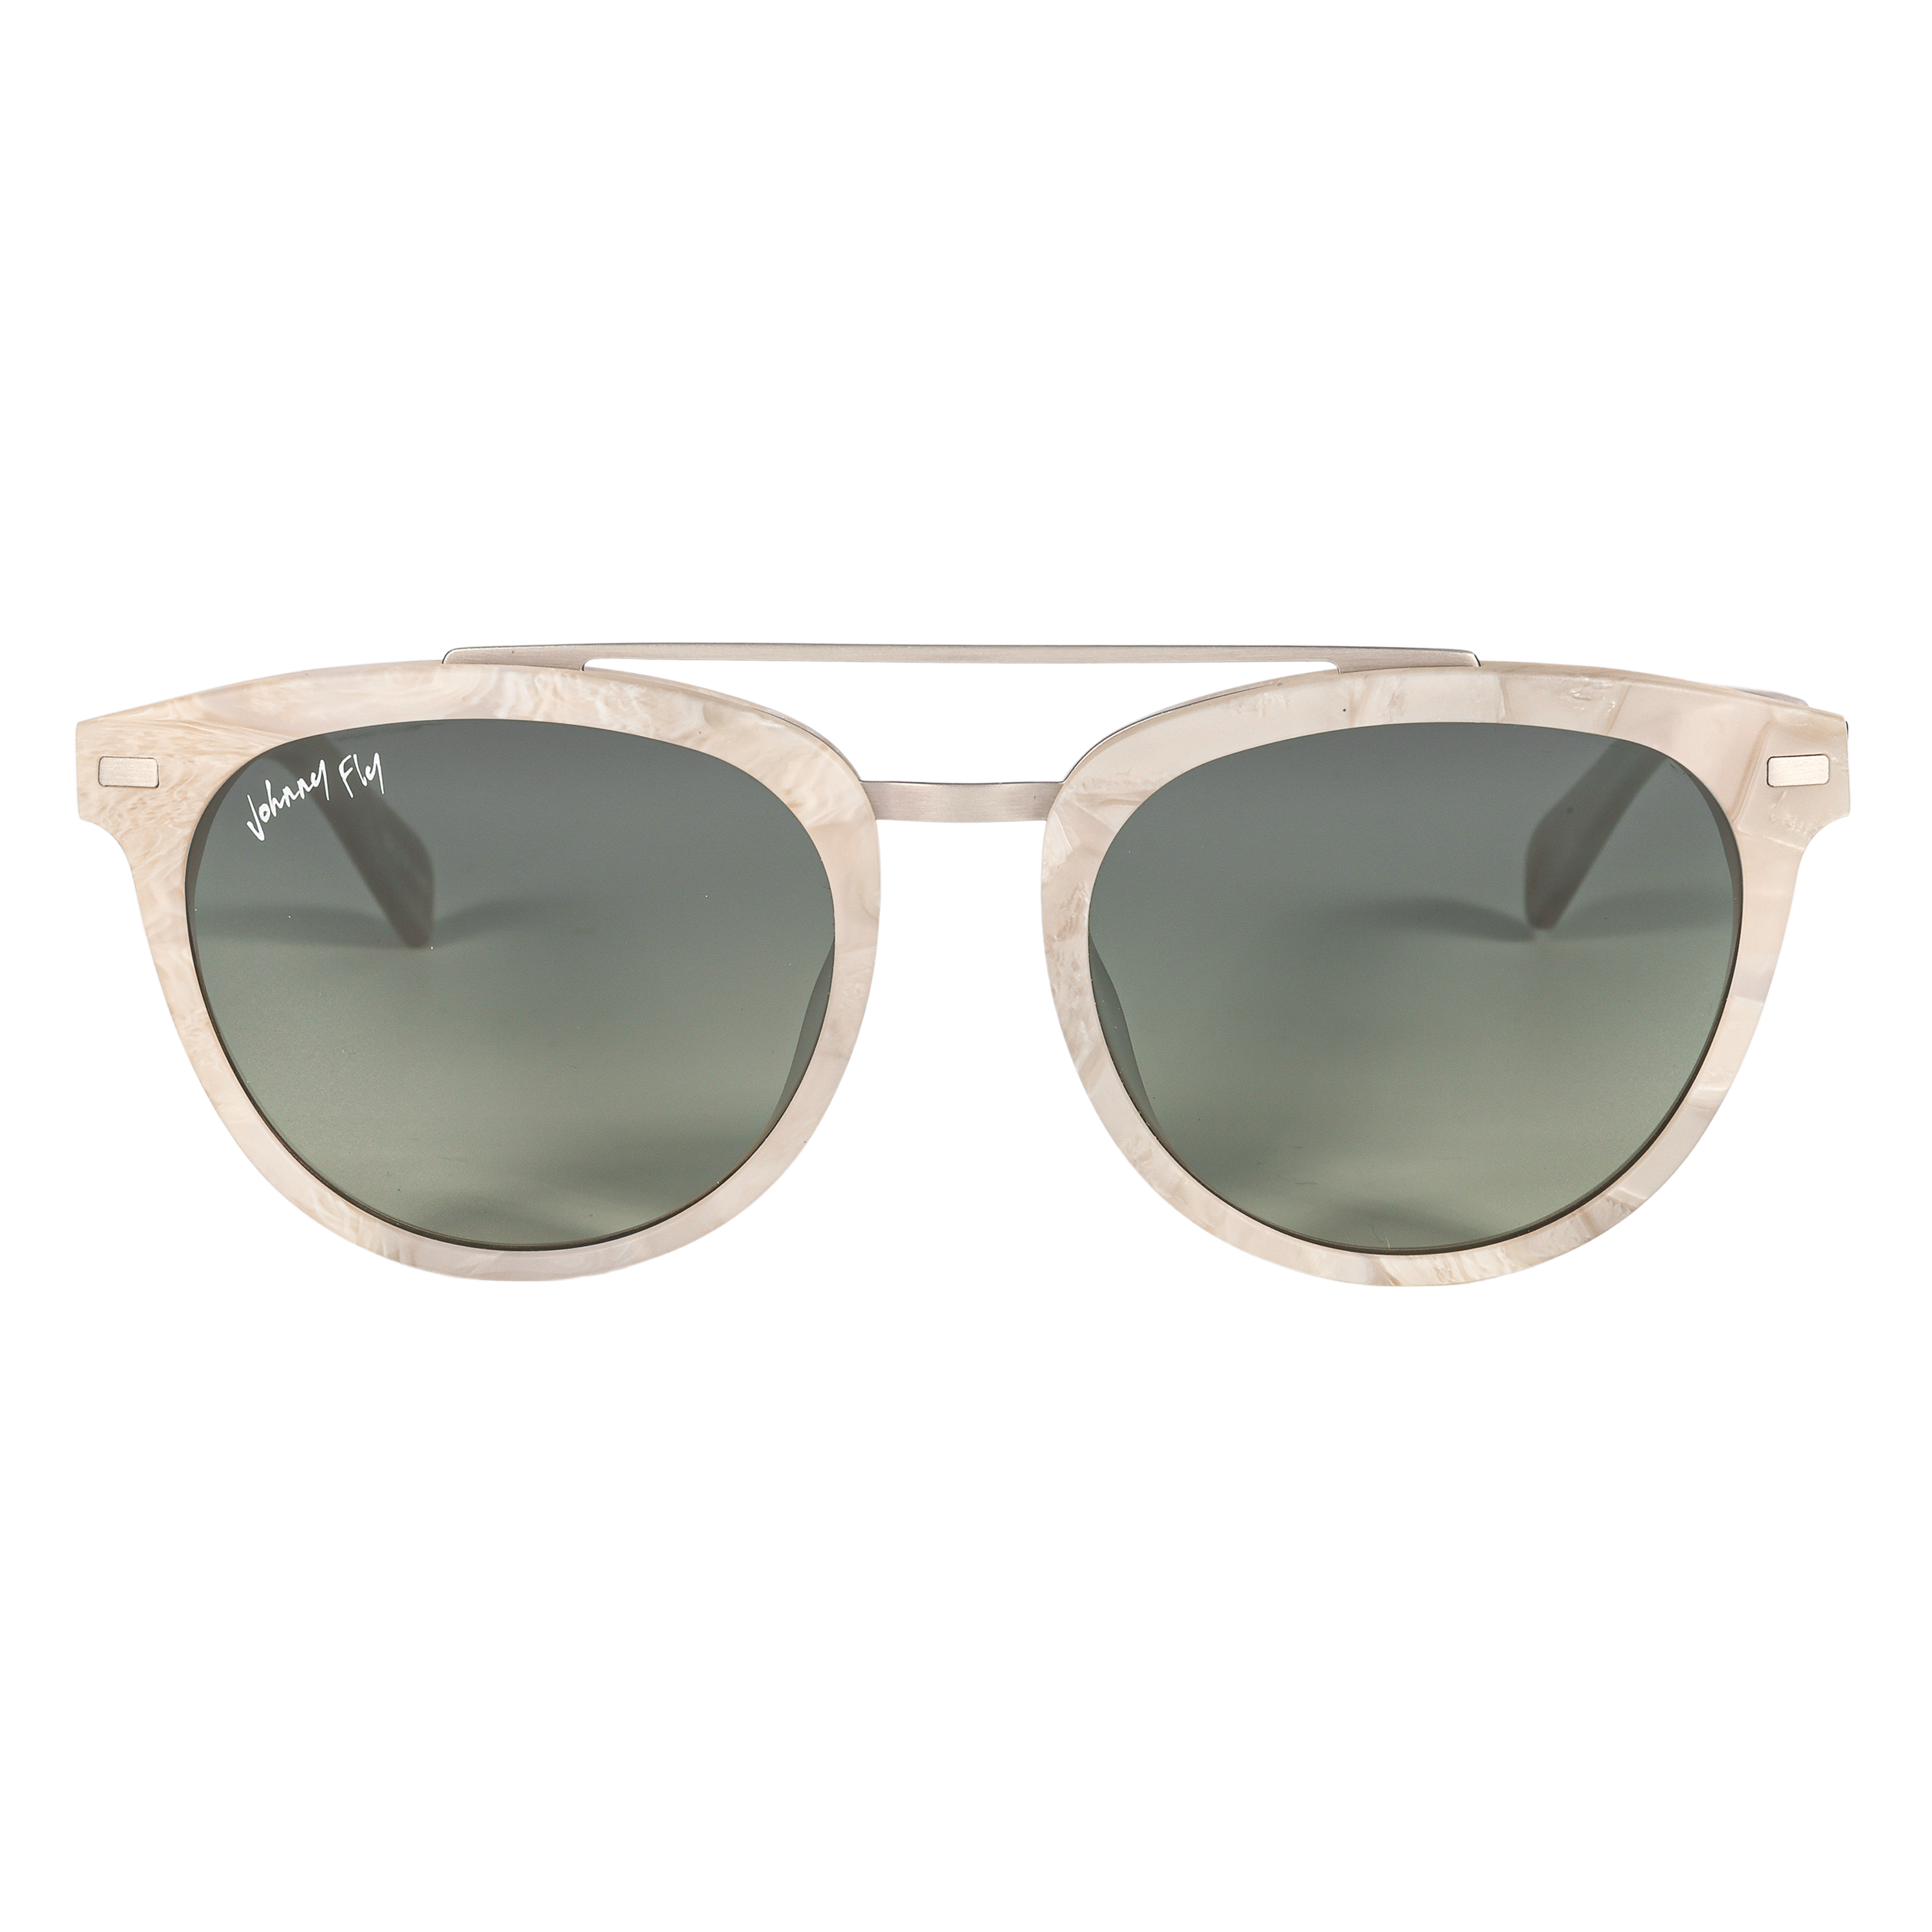 Captain METEOR Crossbar Aviator Polarized Sunglasses by Johnny Fly | Handcrafted with Acetate and Wood 